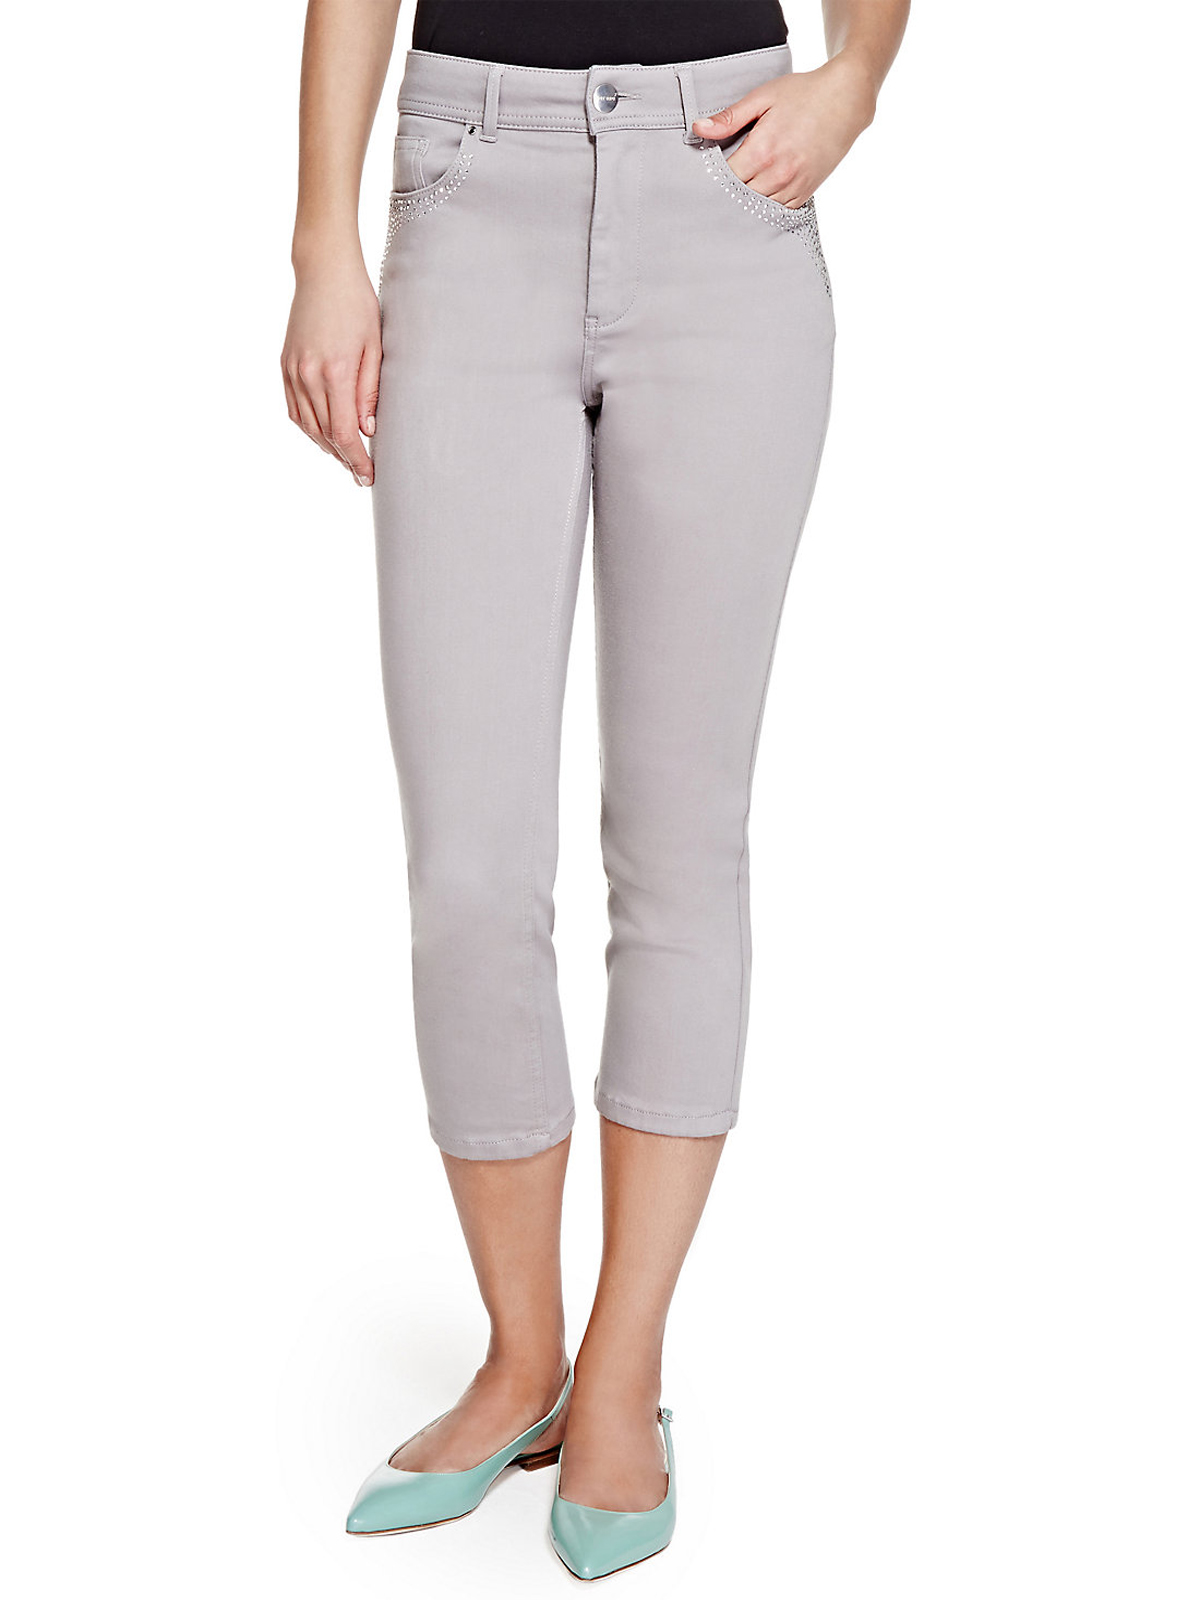 Marks and Spencer - - M&5 ASSORTED Cropped Trousers - Size 8 to 20